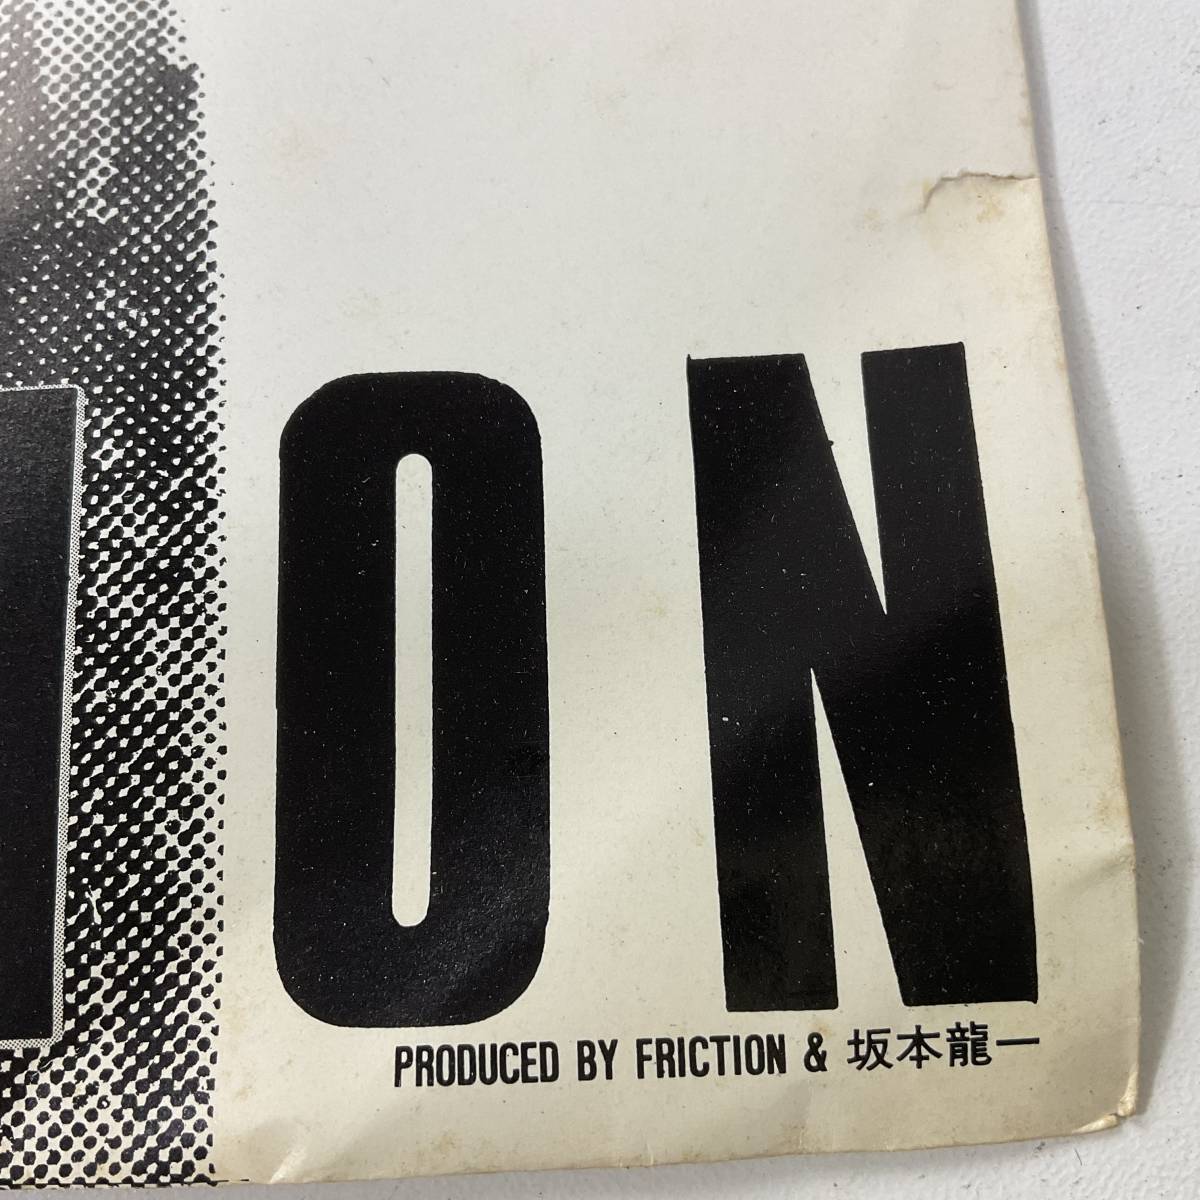  unused record sample record 1980 year original FRICTION friction I CAN TELL PISTOL Reck. pine Hige Sakamoto Ryuichi PASS Records PAS204 UNPLAYED 7*